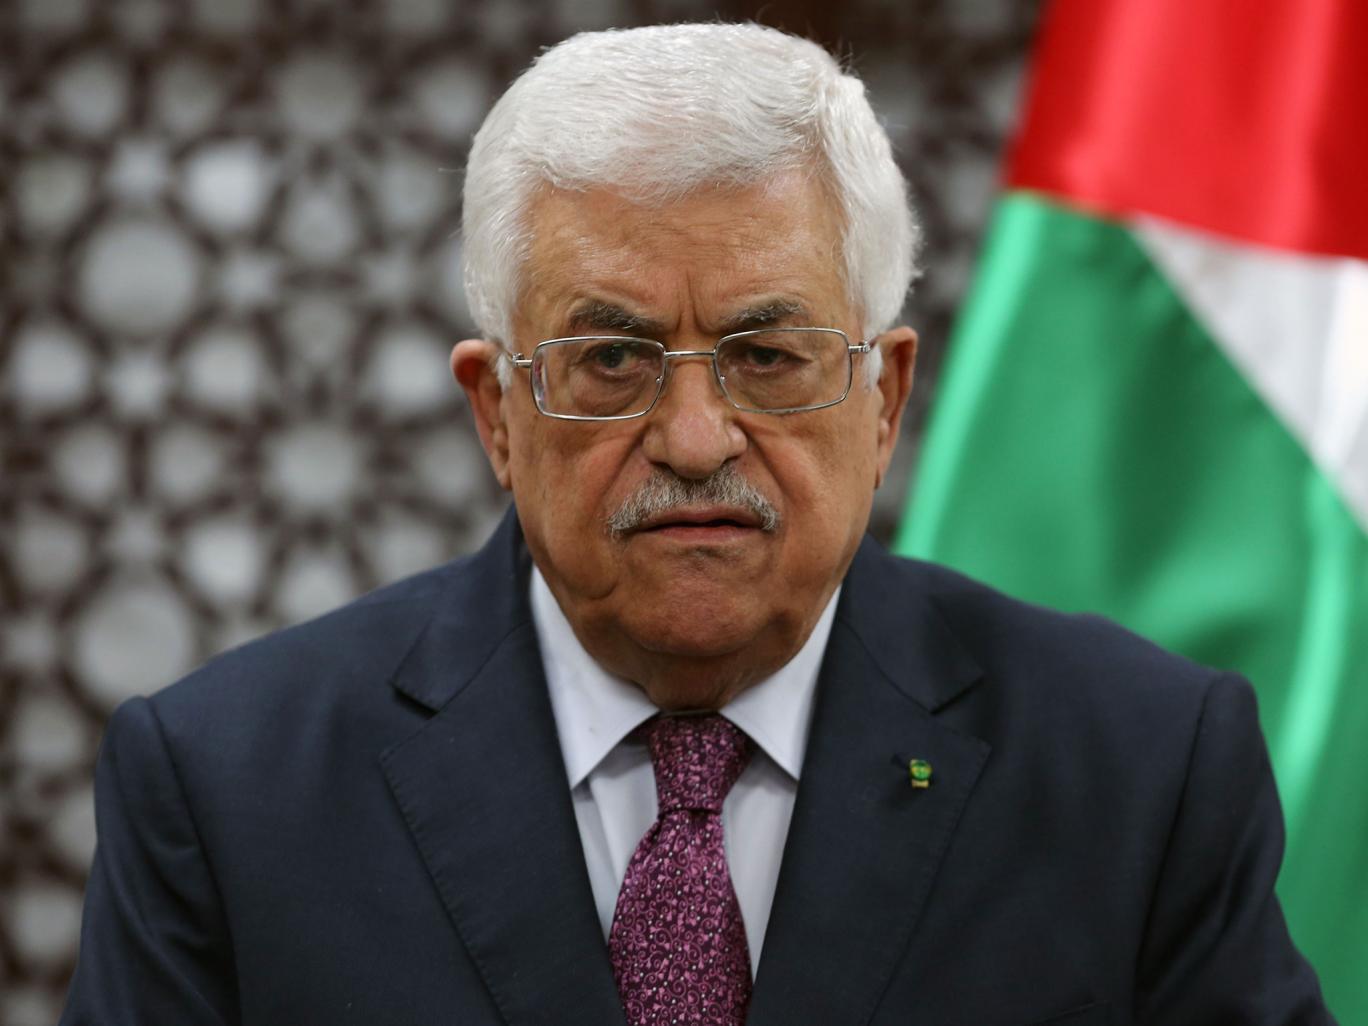 Palestinian President Mahmoud Abbas has objected to the use of metal detectors at the Temple Mount